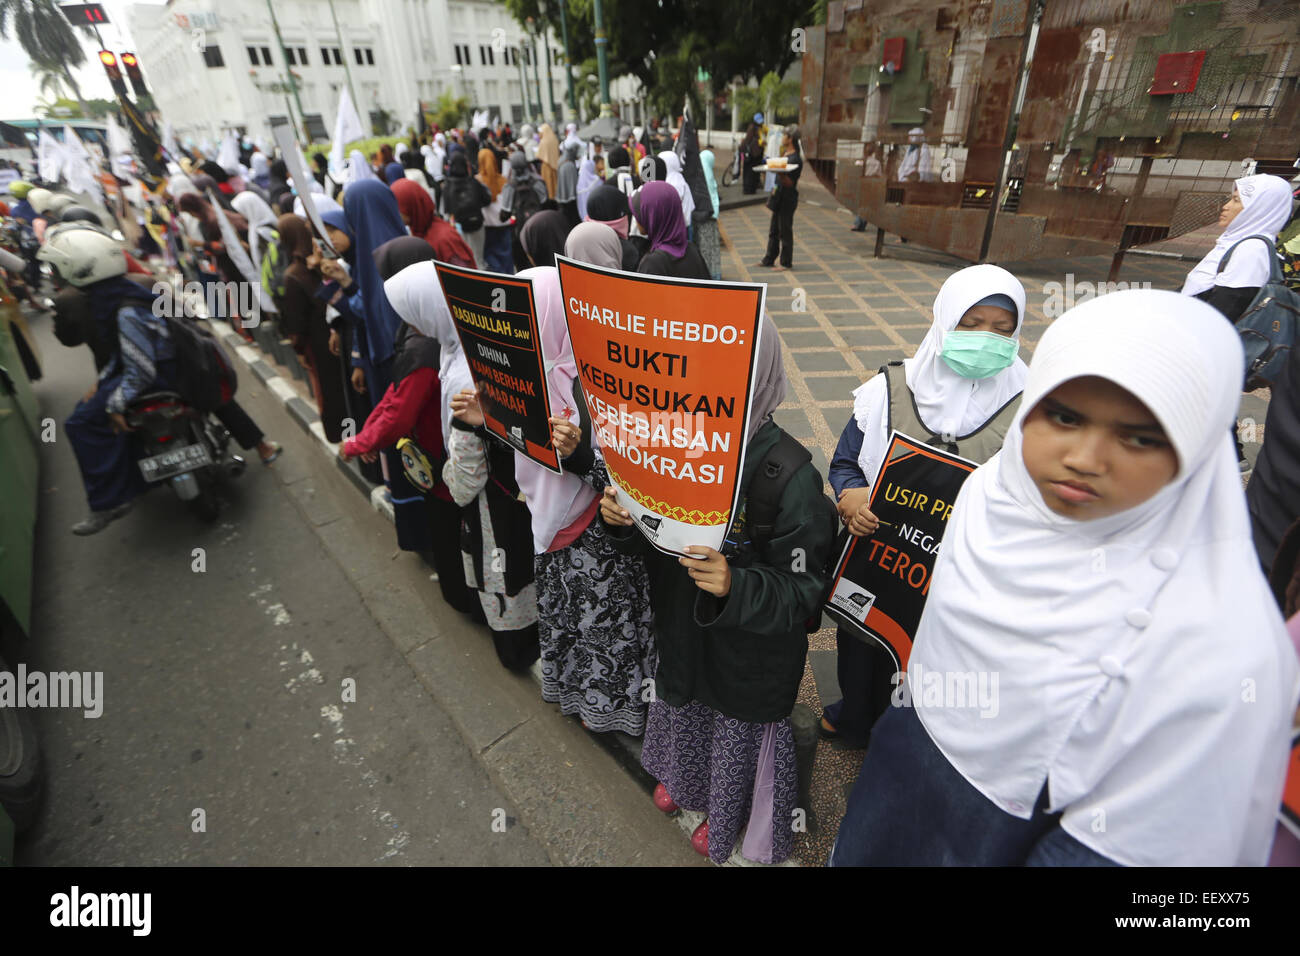 Yogyakarta, Indonesia. 23rd Jan, 2015. Indonesia muslim Hizbut Tahrir held anti Charlie Hebdo protest on January 23, 2015 in Yogyakarta, Indonesia. They demanded the editor of Charlie Hebdo and the French government to stop all forms of insult to Prophet Muhammad and exciting final issue number 3 million copies of the latest edition of the load back the cartoons of the Prophet Muhammad. Credit:  Sijori Images/ZUMA Wire/Alamy Live News Stock Photo